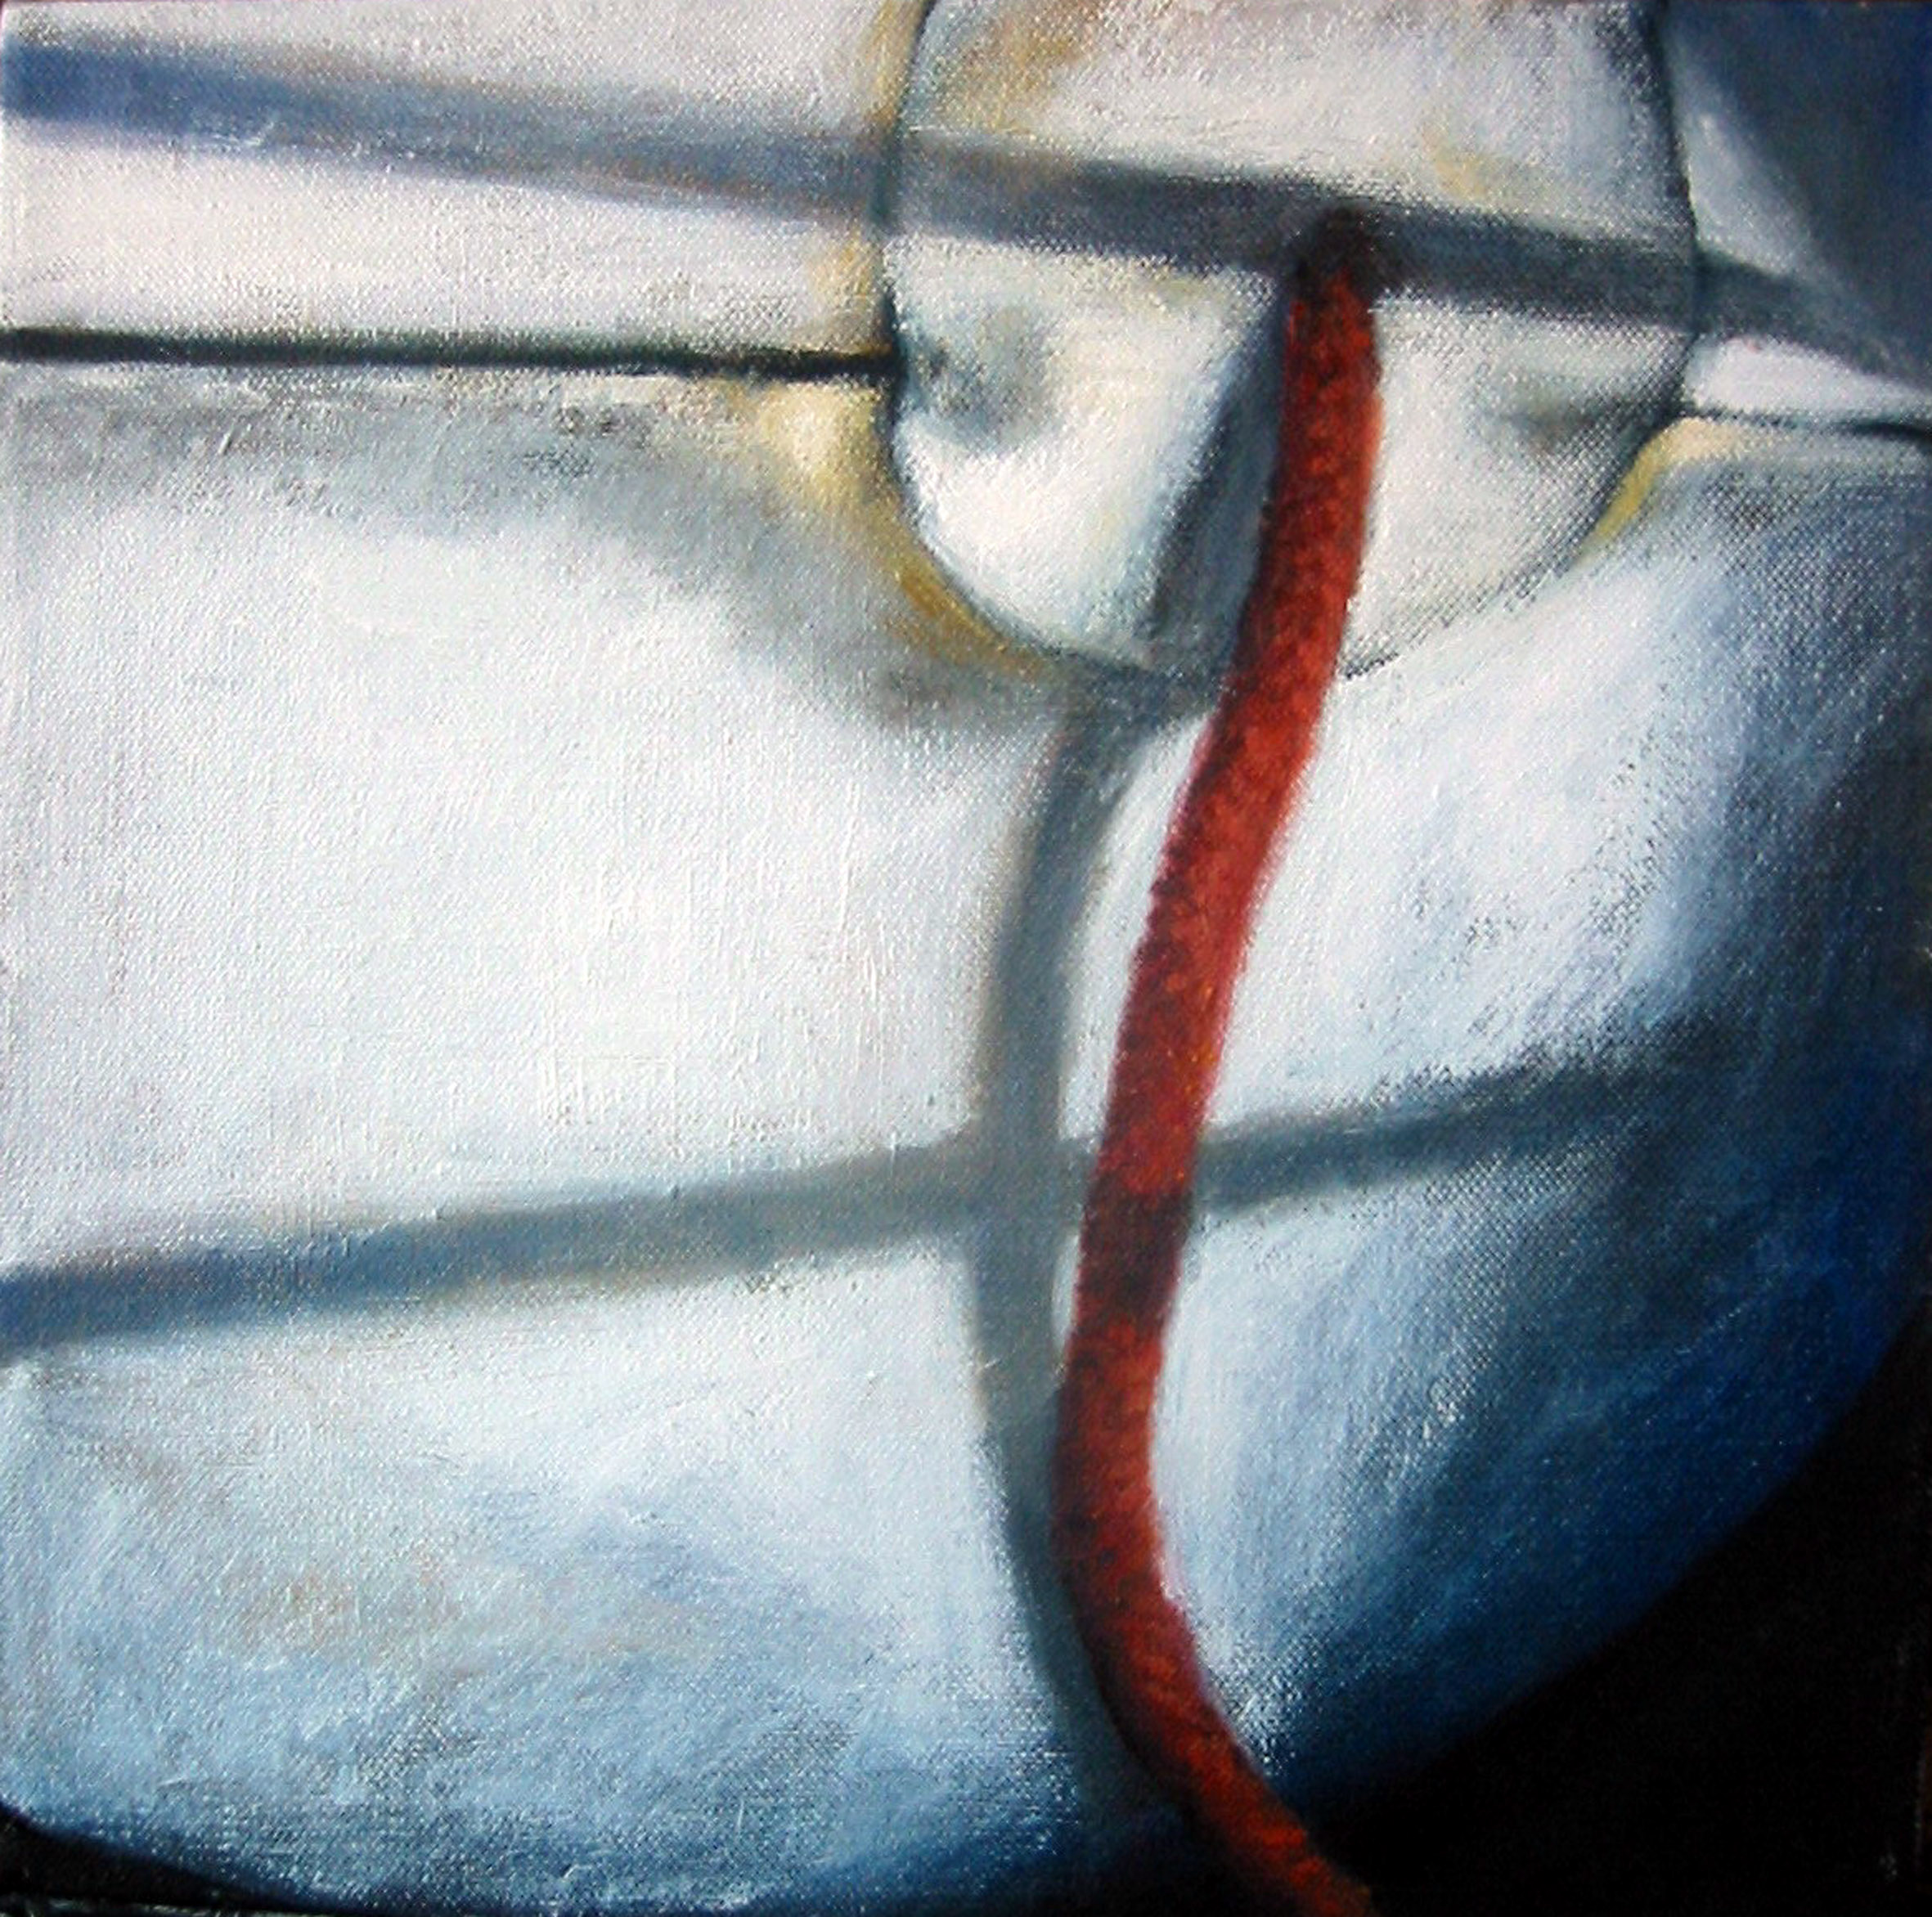   Exterior with red rope  Oil on canvas 30x30 cm 2006 